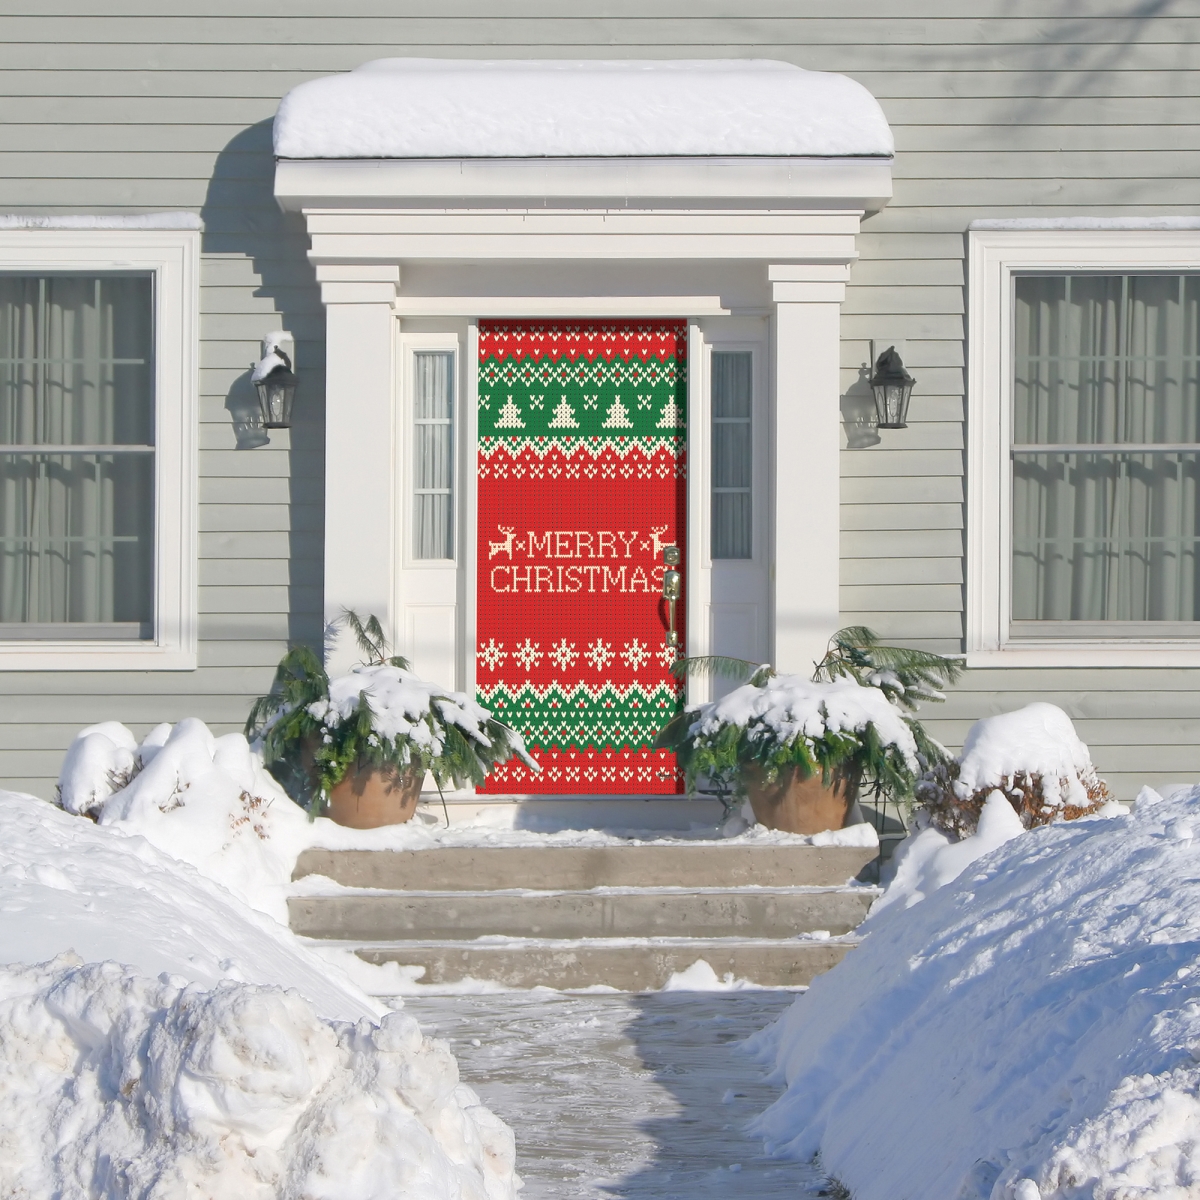 285906xmas-002 36 X 80 In. Ugly Christmas Sweater Merry Christmas Christmas Front Door Mural Sign Banner Decor, Multi Color